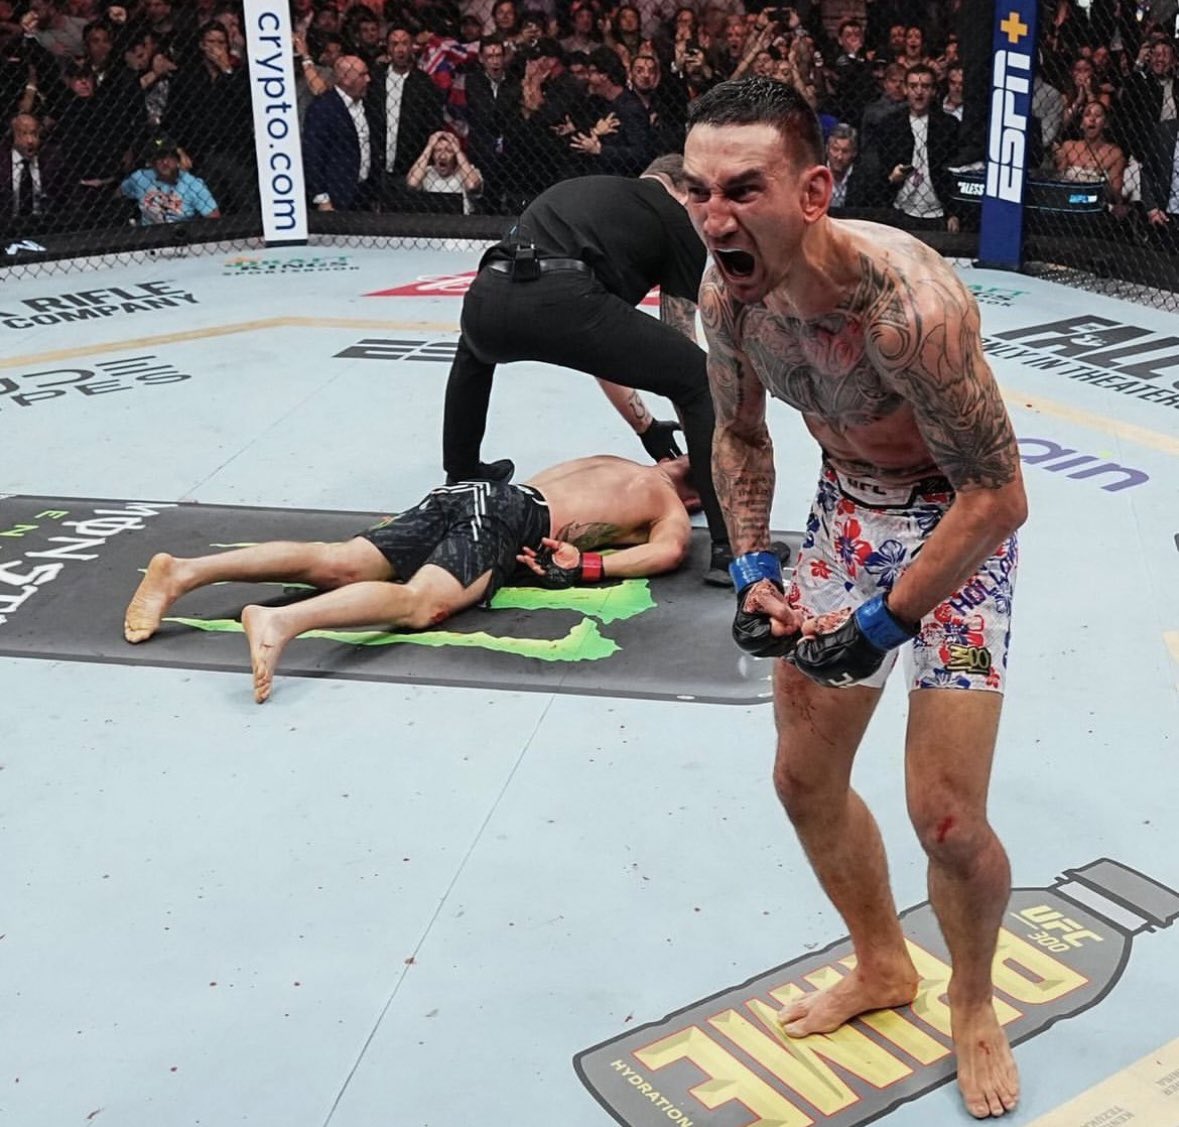 Max Holloway went from getting clipped up by the dead body of Korean zombie to flatline koing gaethje after out classing him this sport is wild